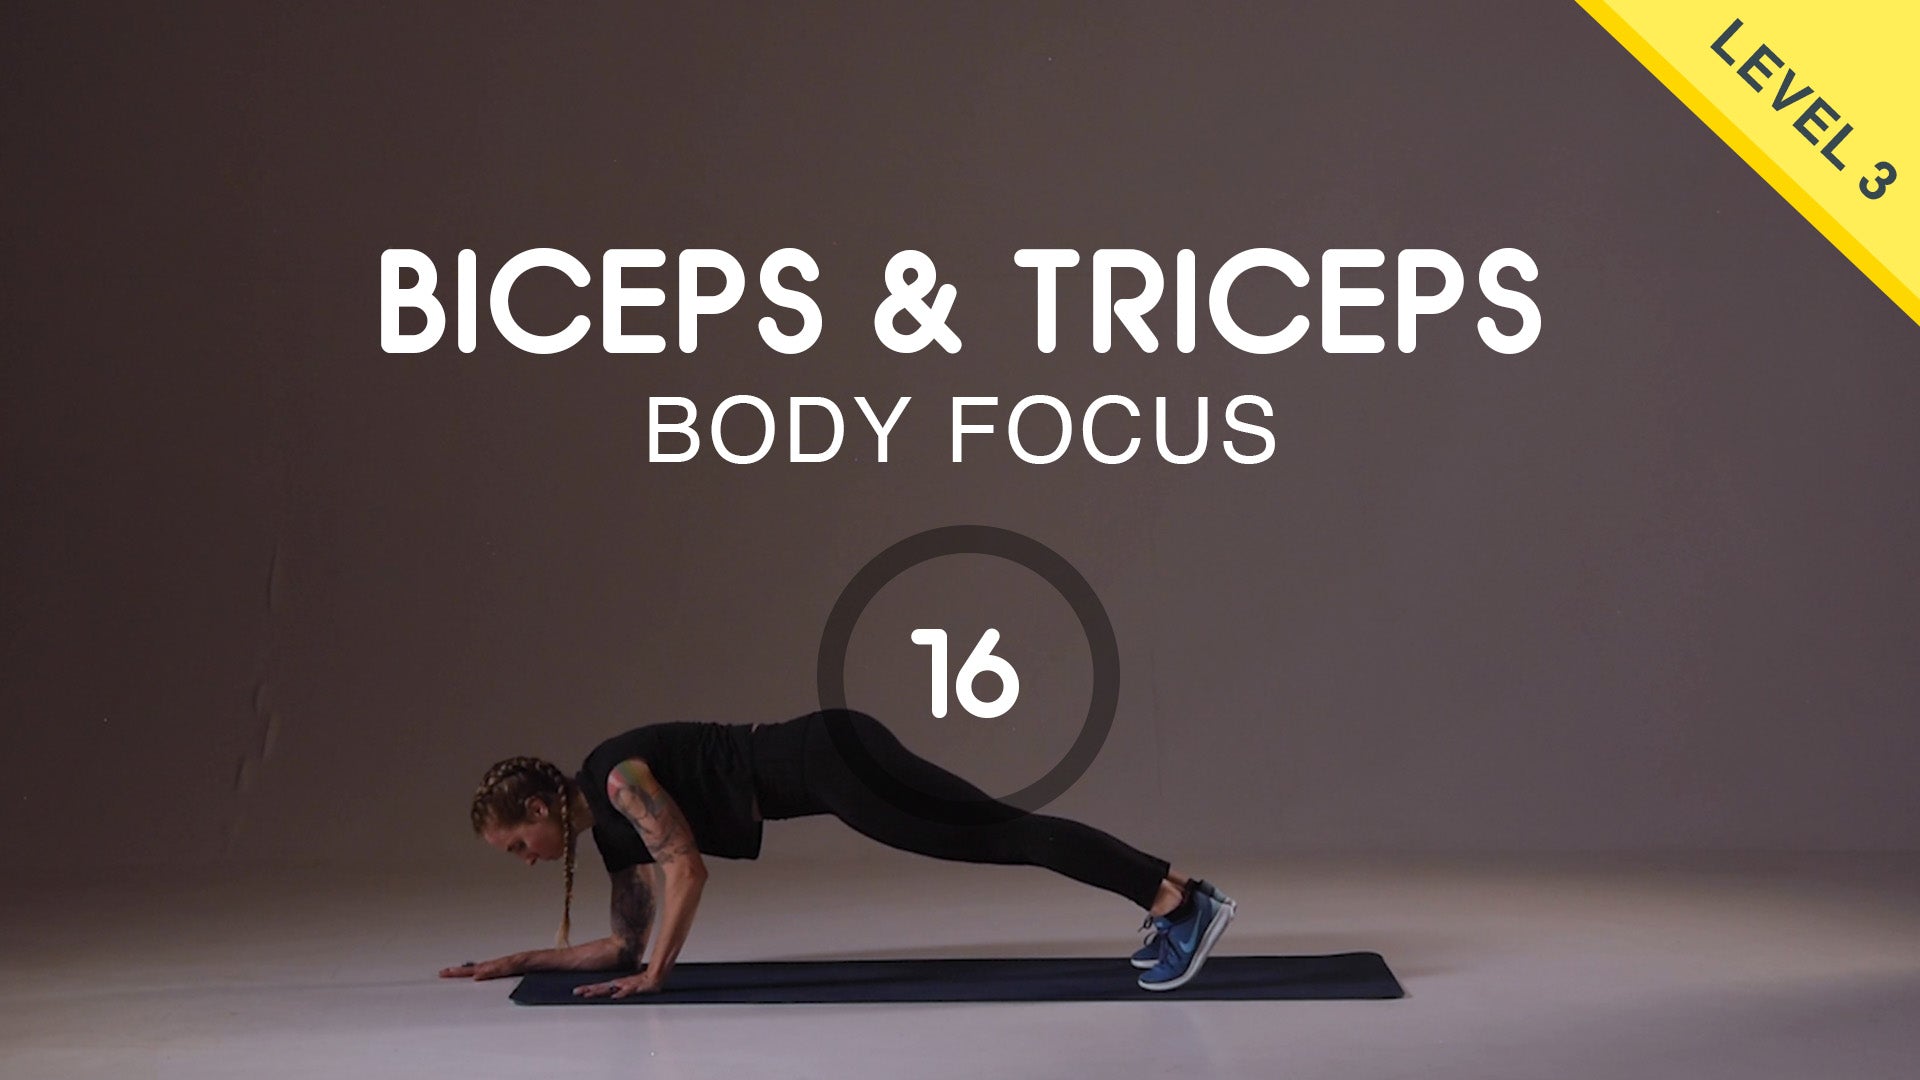 Biceps & Triceps - Free Workout Videos for Home or Work – Group HIIT